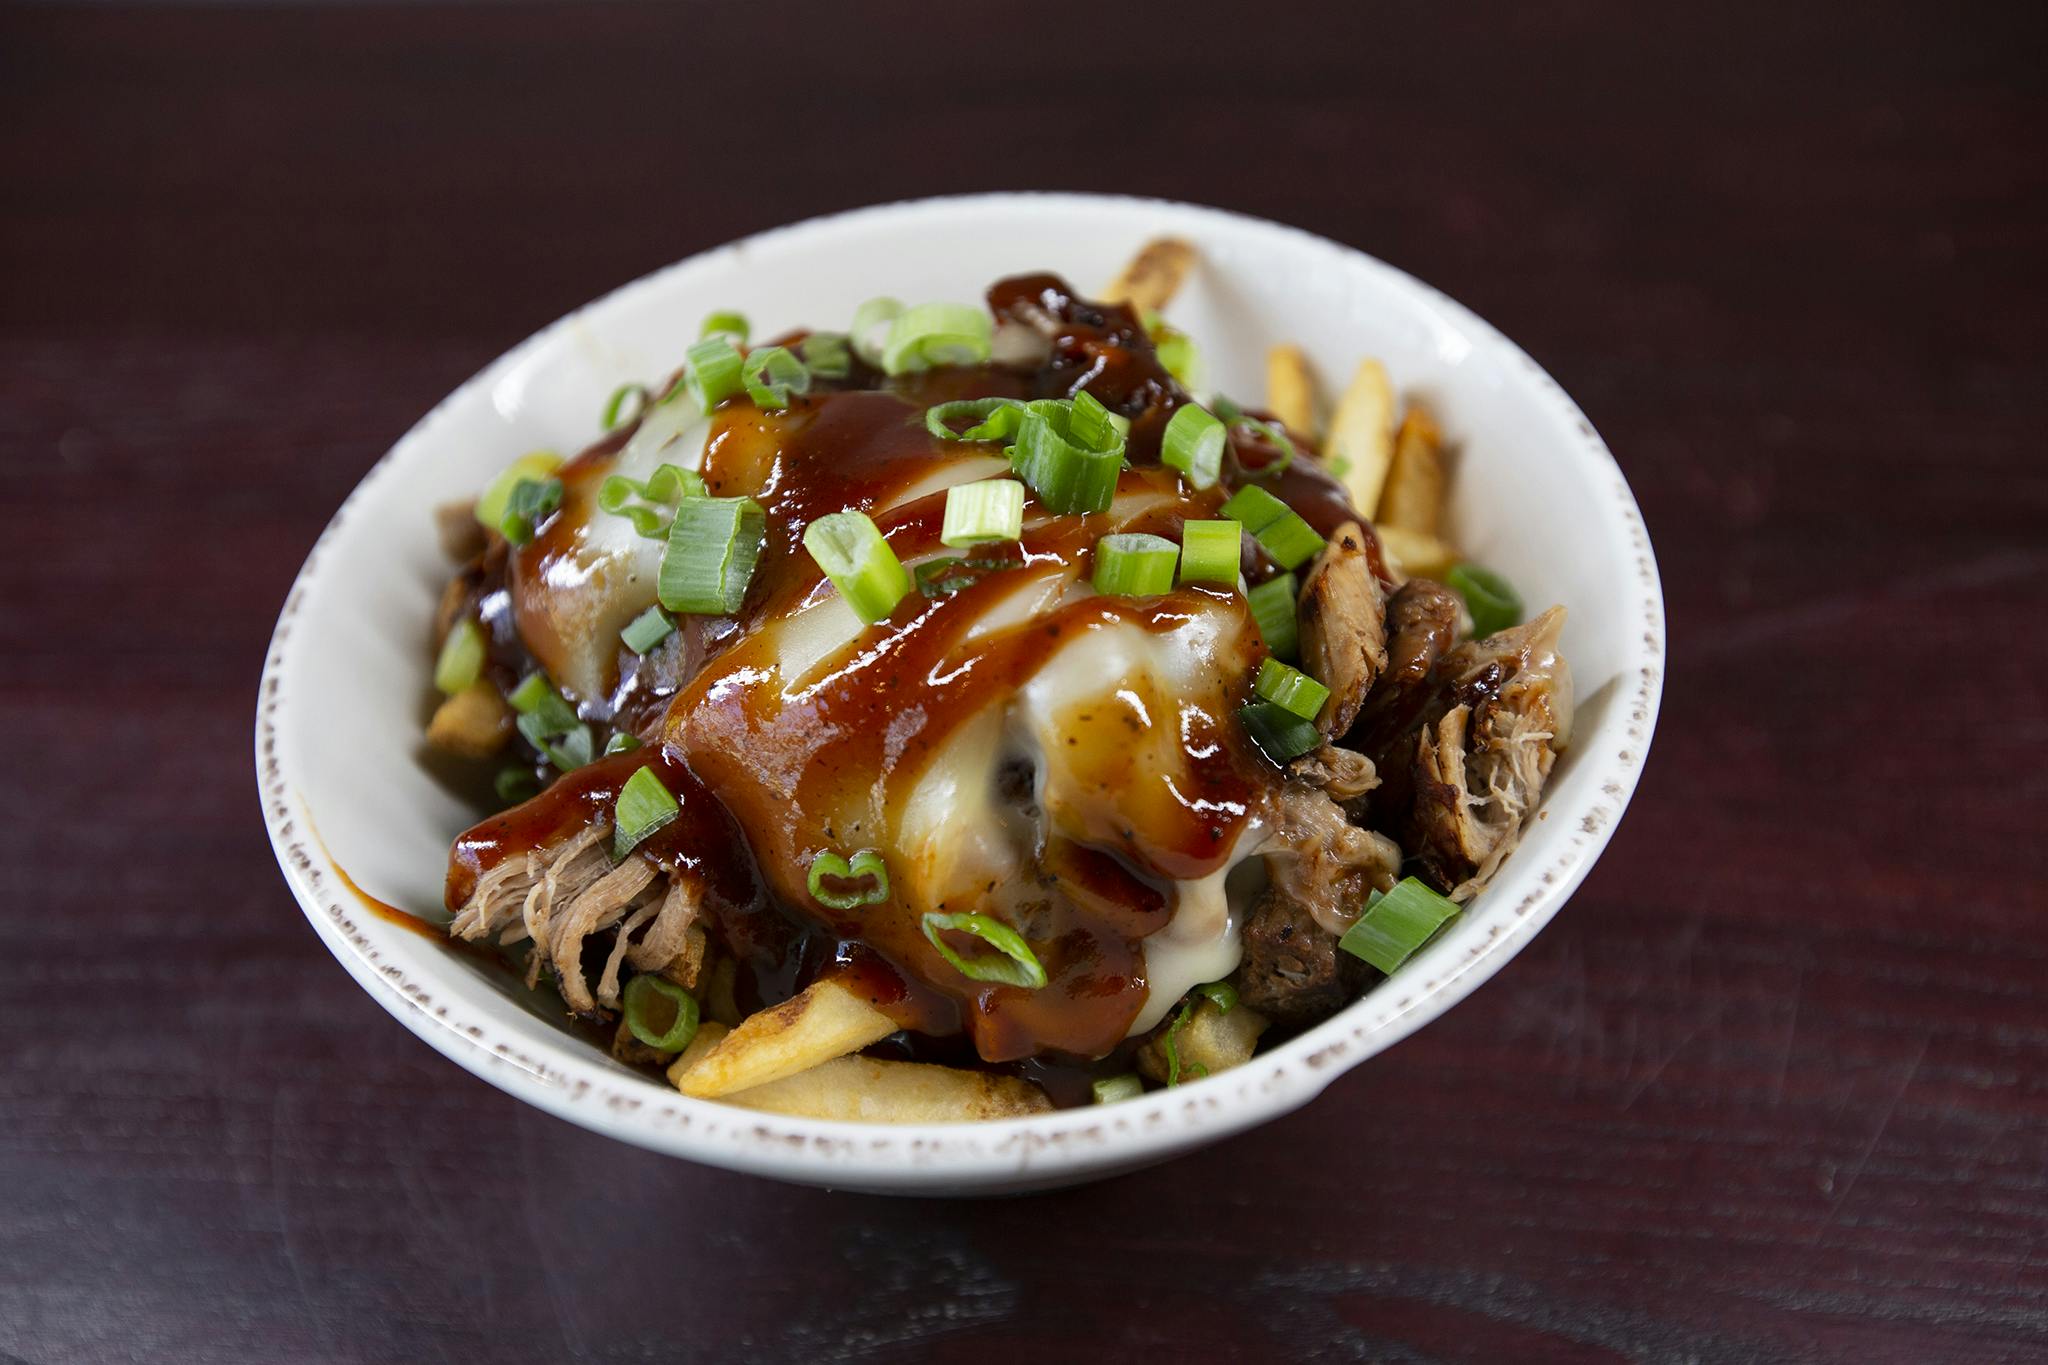 Pulled Pork Fries from Firehouse Grill - Chicago Ave in Evanston, IL